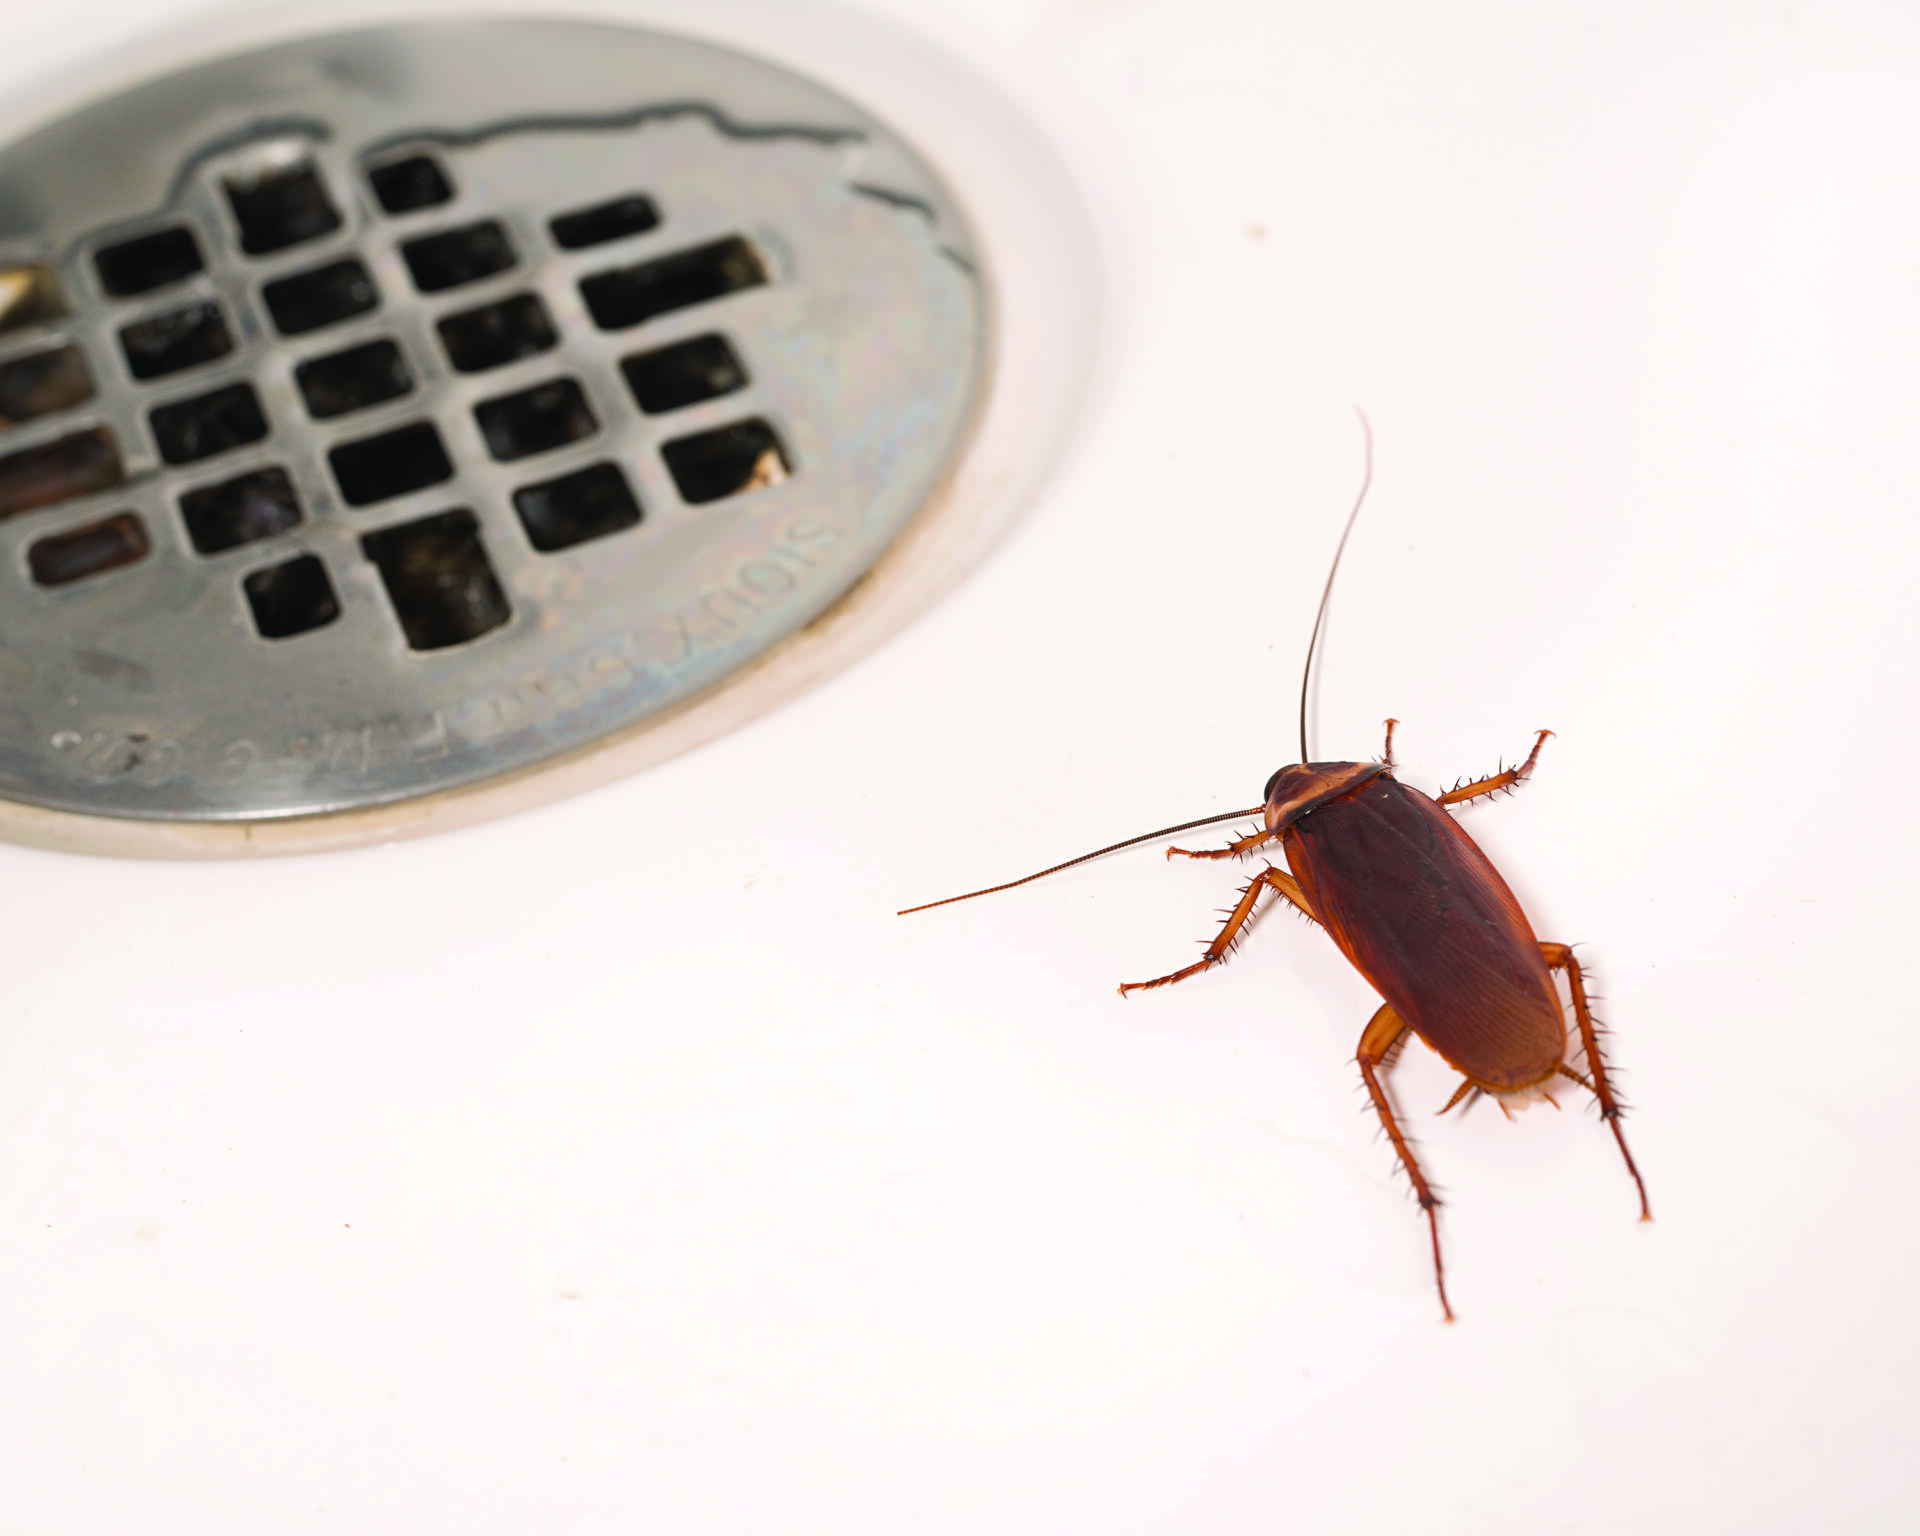 An American Cockroach in a shower